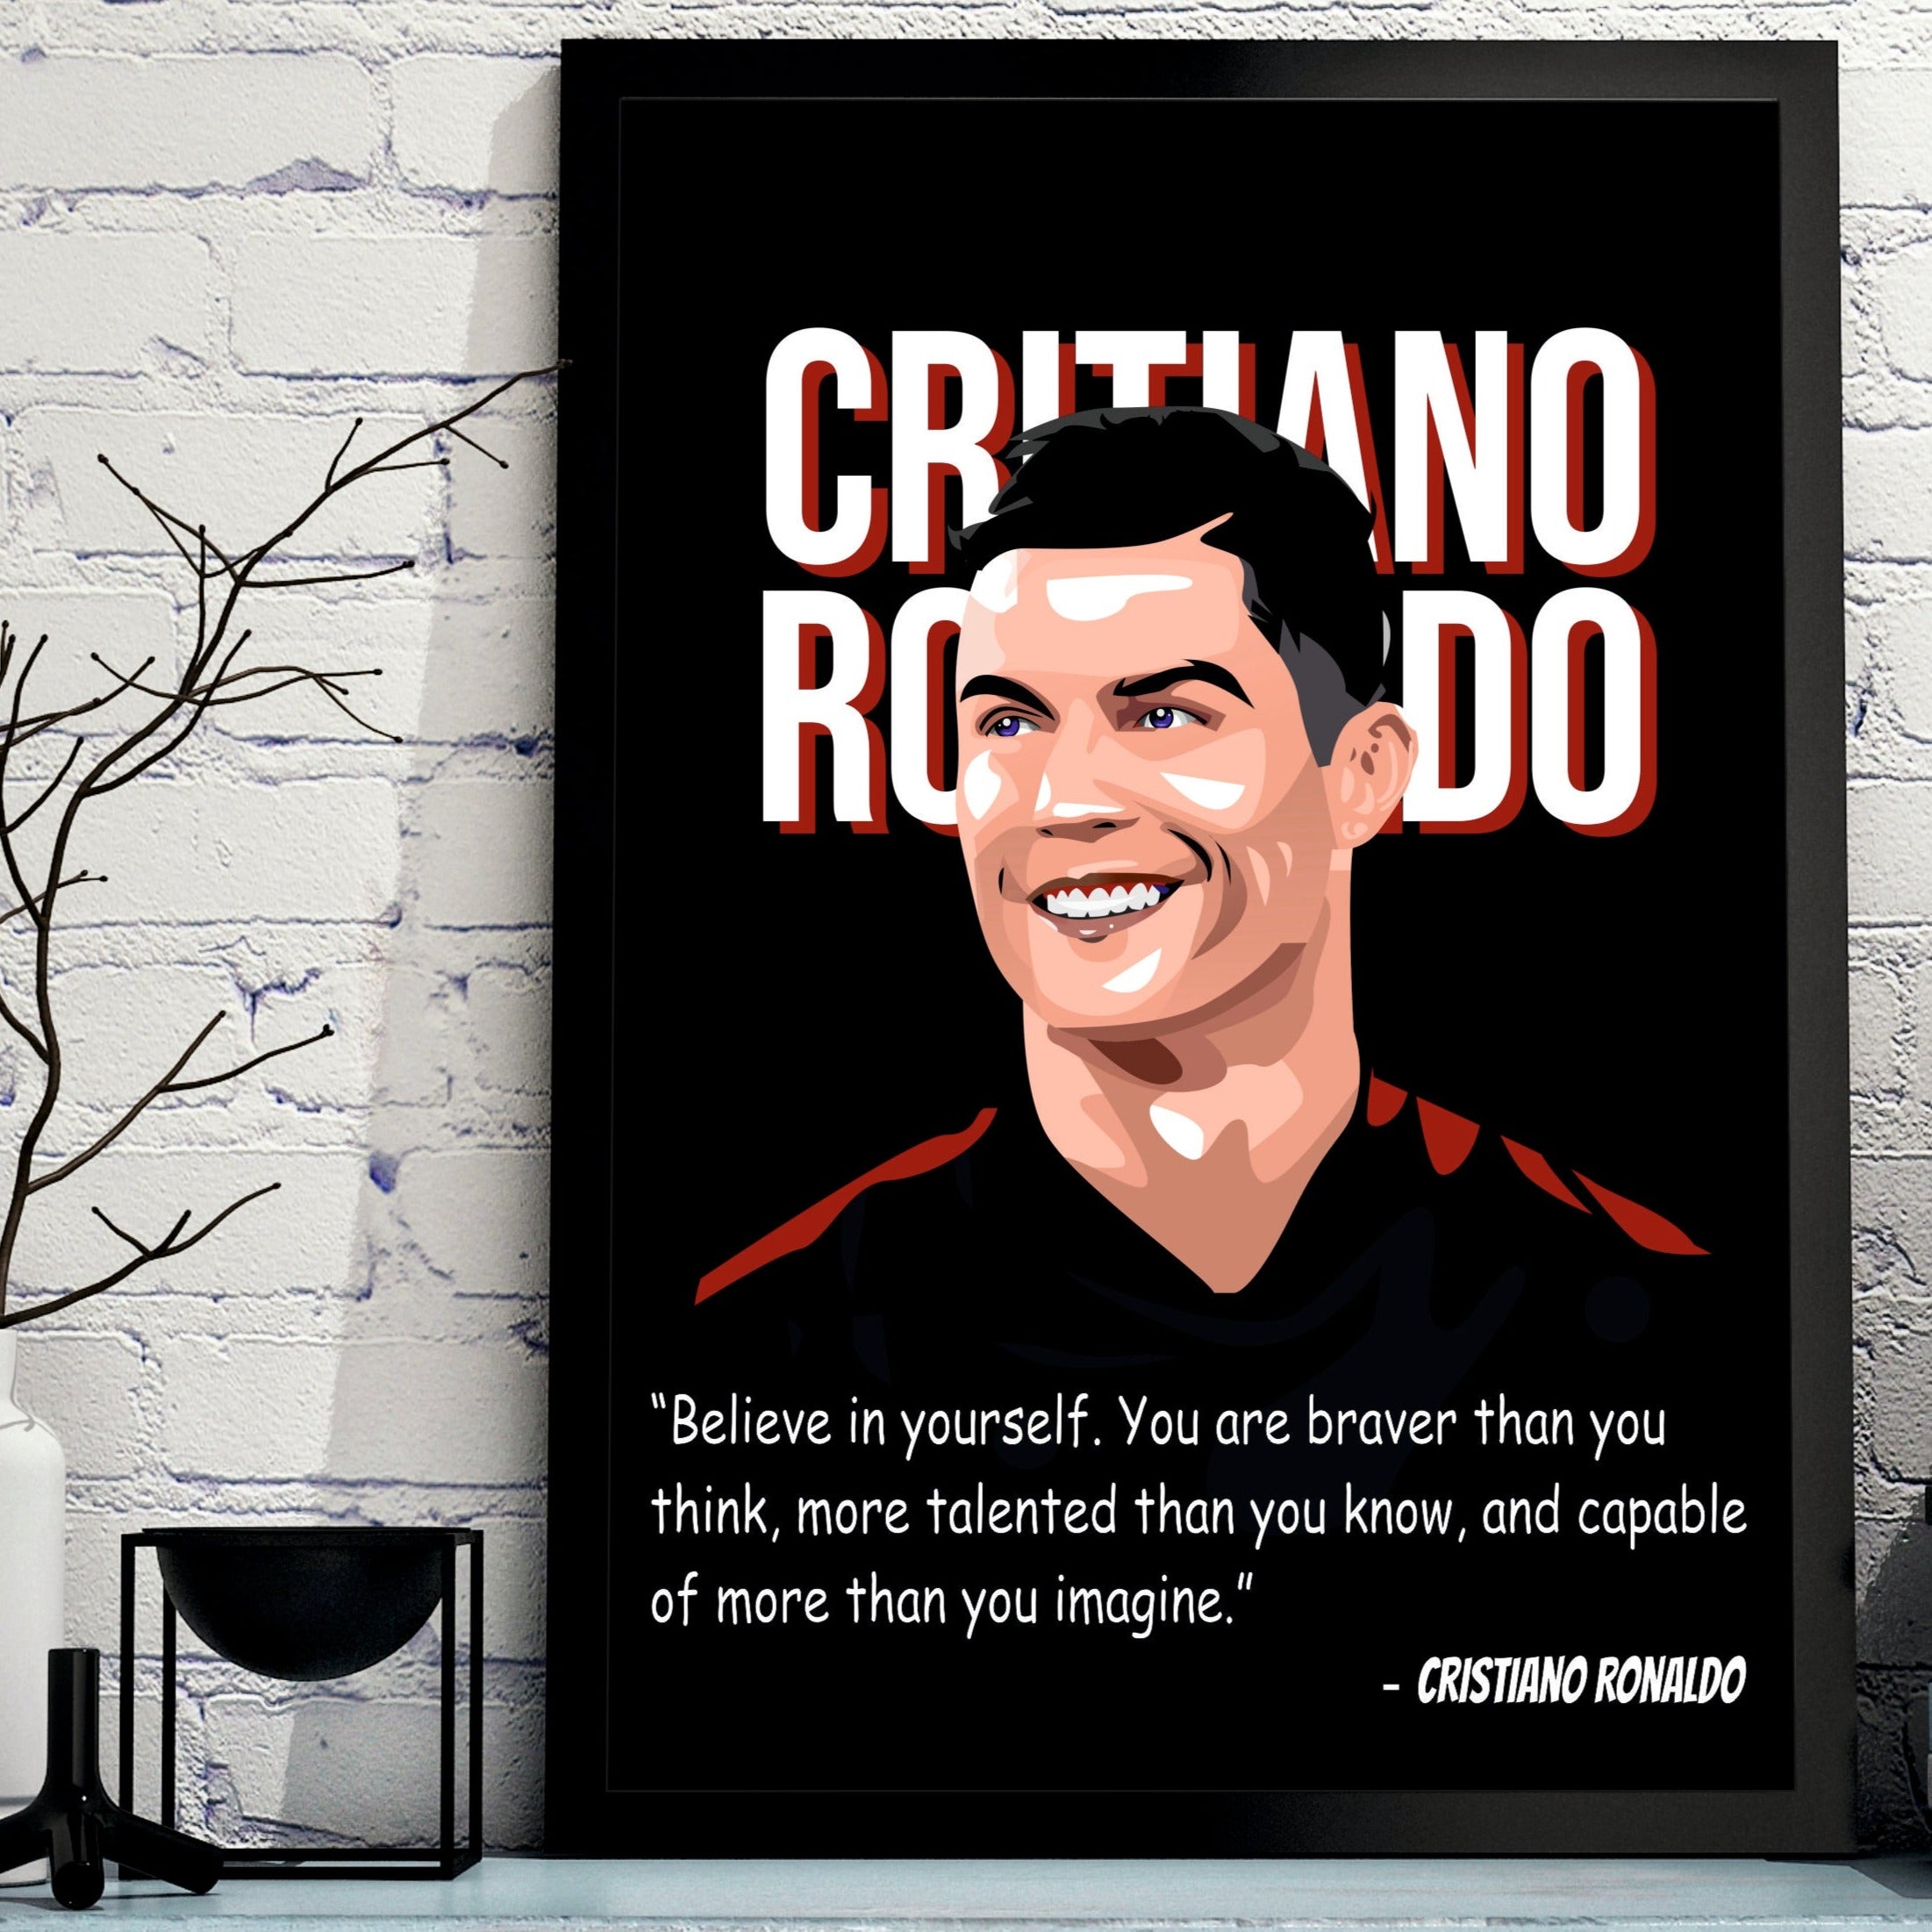 Ronaldo Believe - Poster Frame (Pack of 2 Pieces)